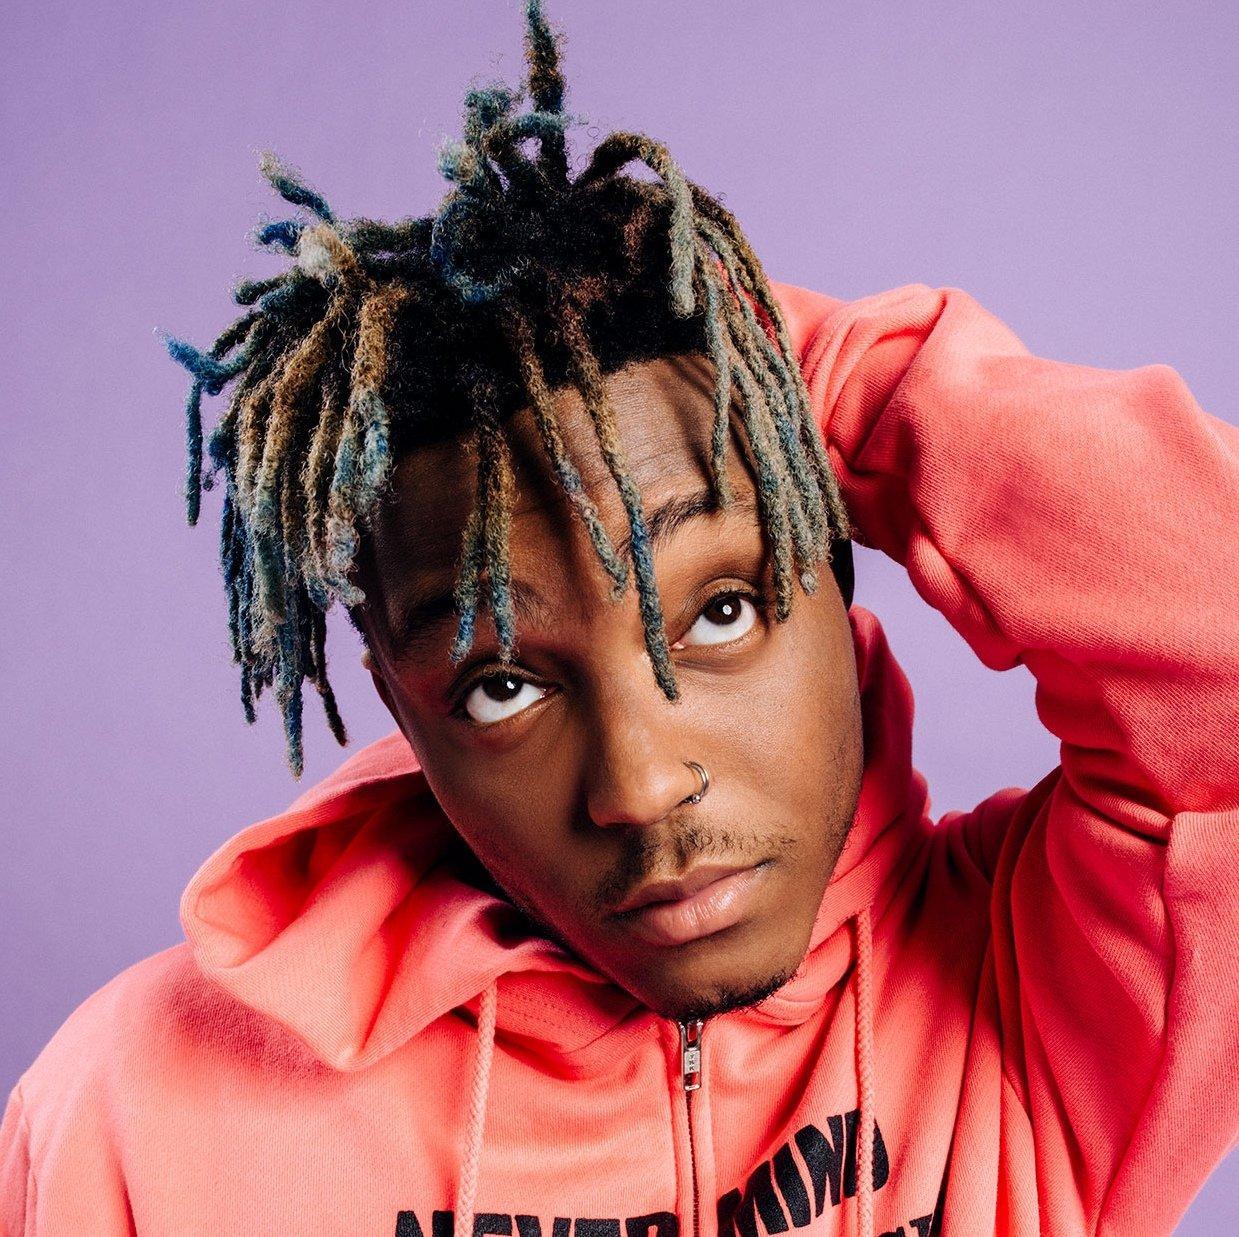 Juice WRLD Songs and Wallpapers 2020 скриншот 5.